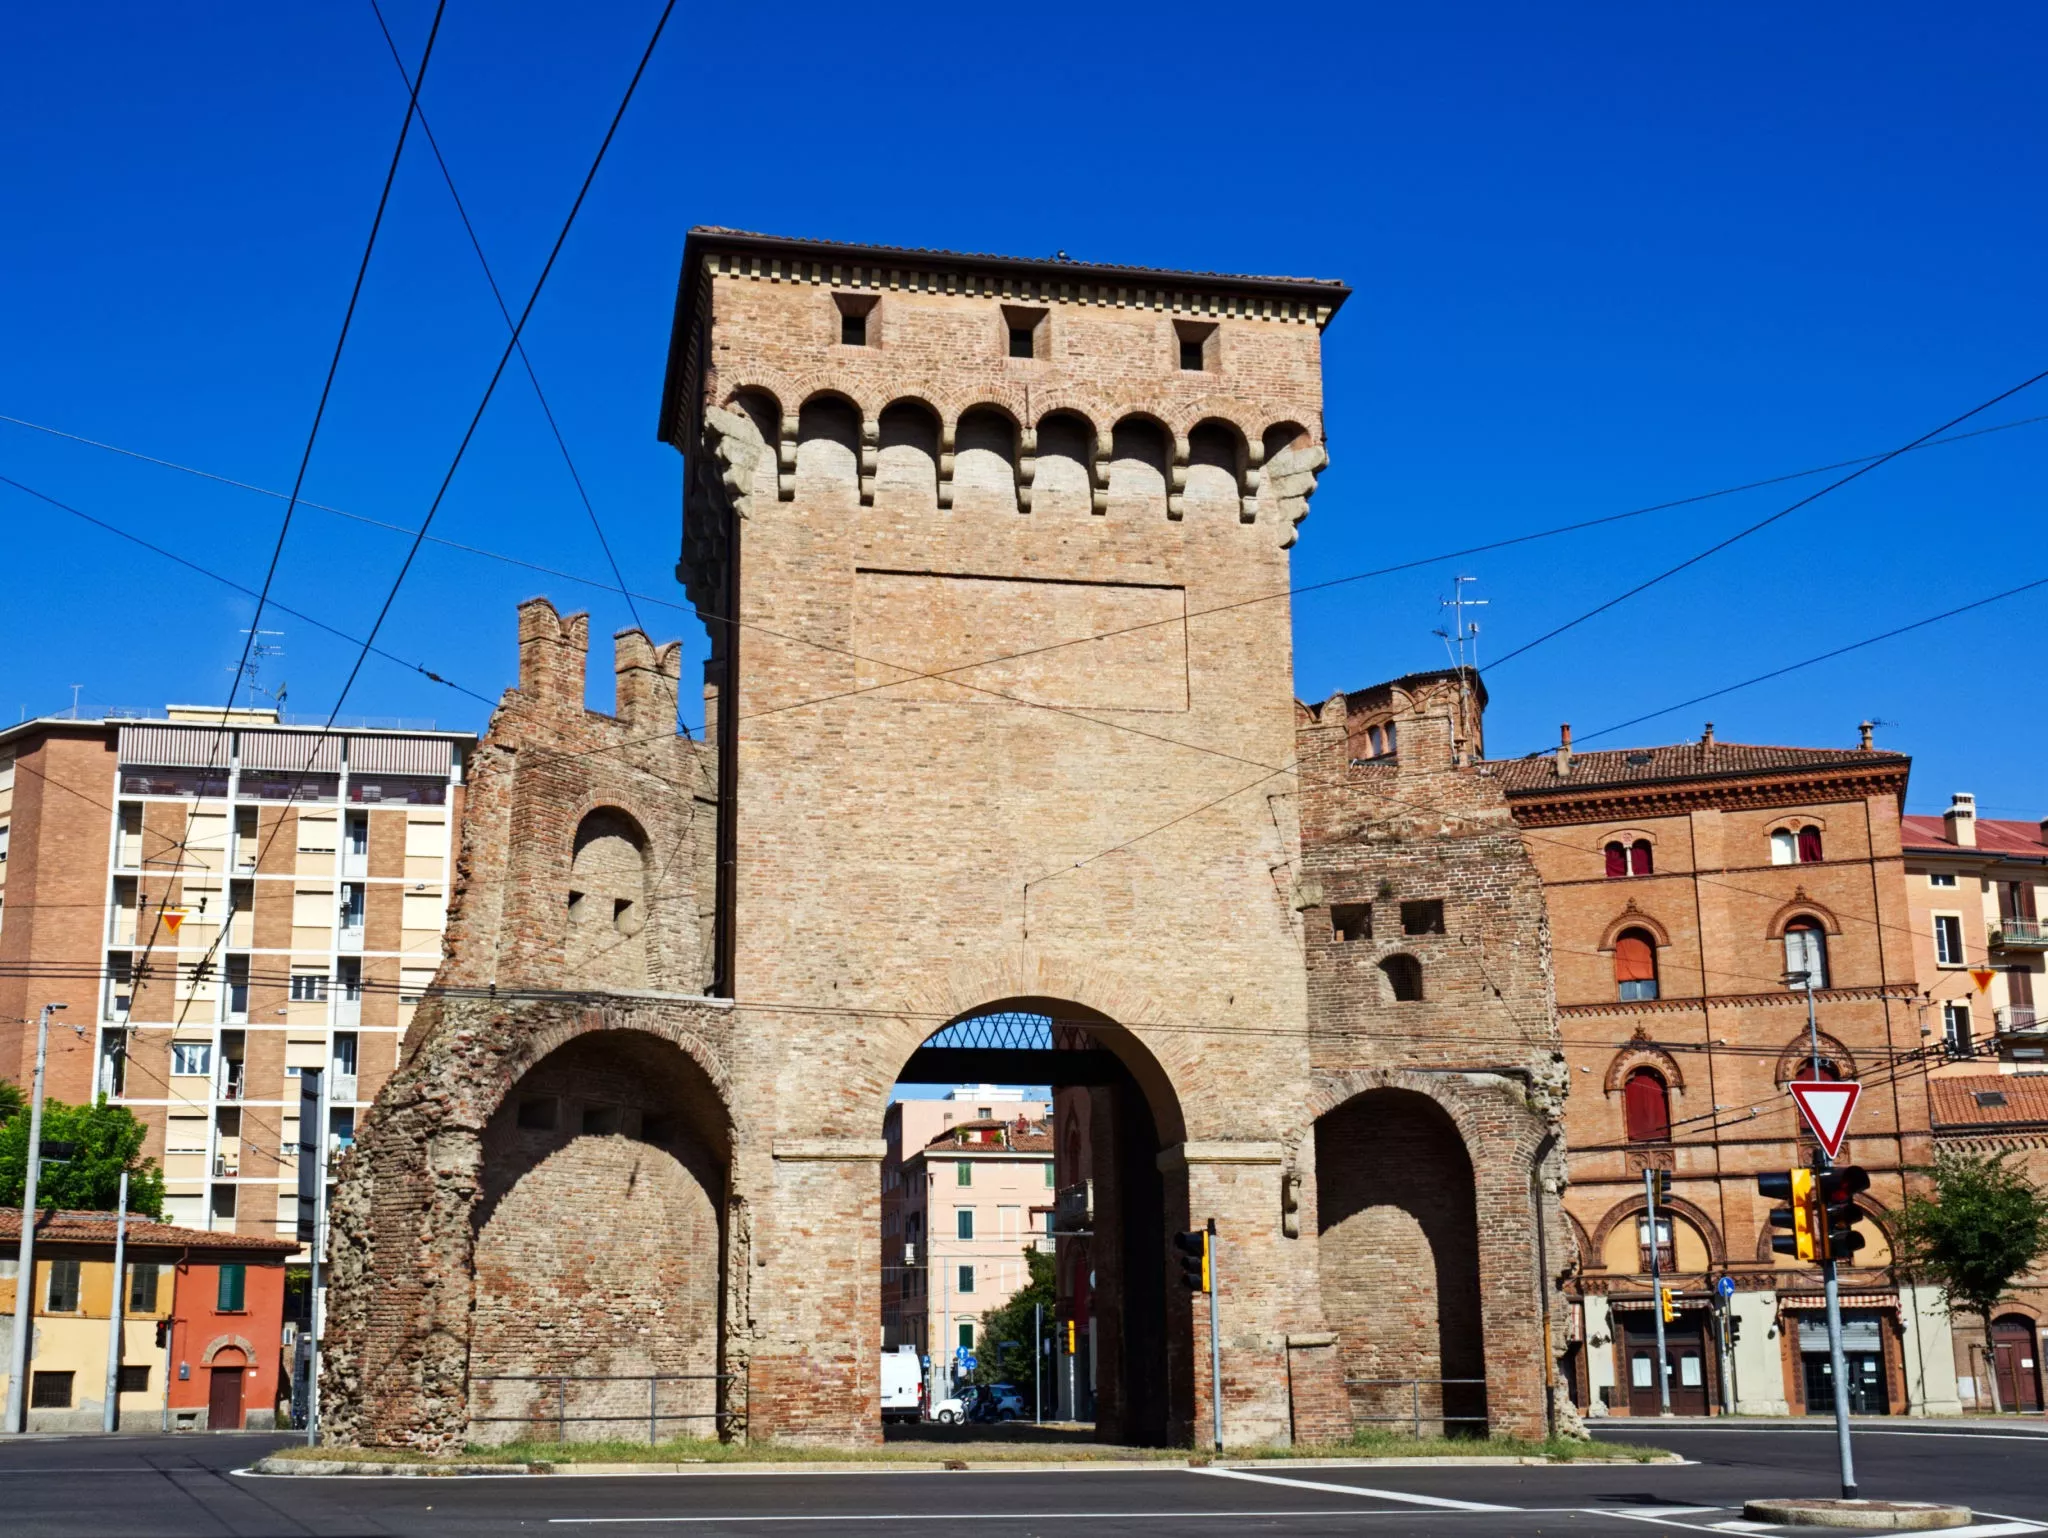 Porta San Felice in Italy, Europe | Architecture - Rated 3.5